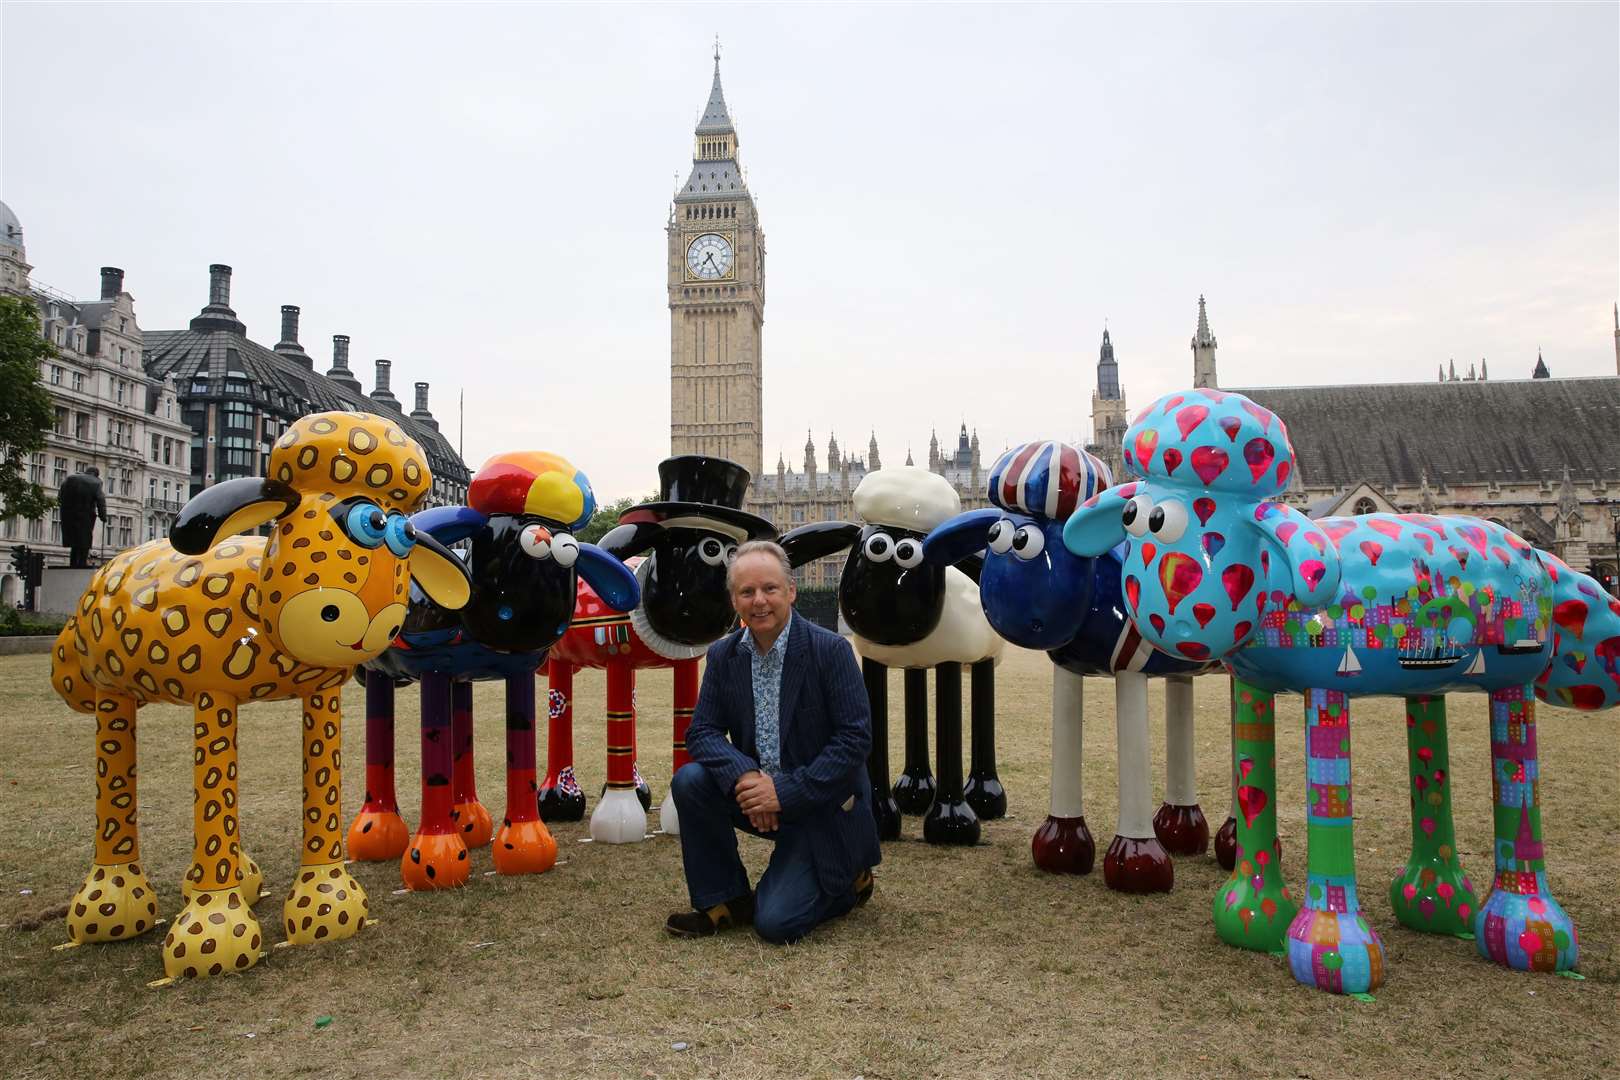 Nick Park, creator of Shaun the Sheep, with some of the Shauns